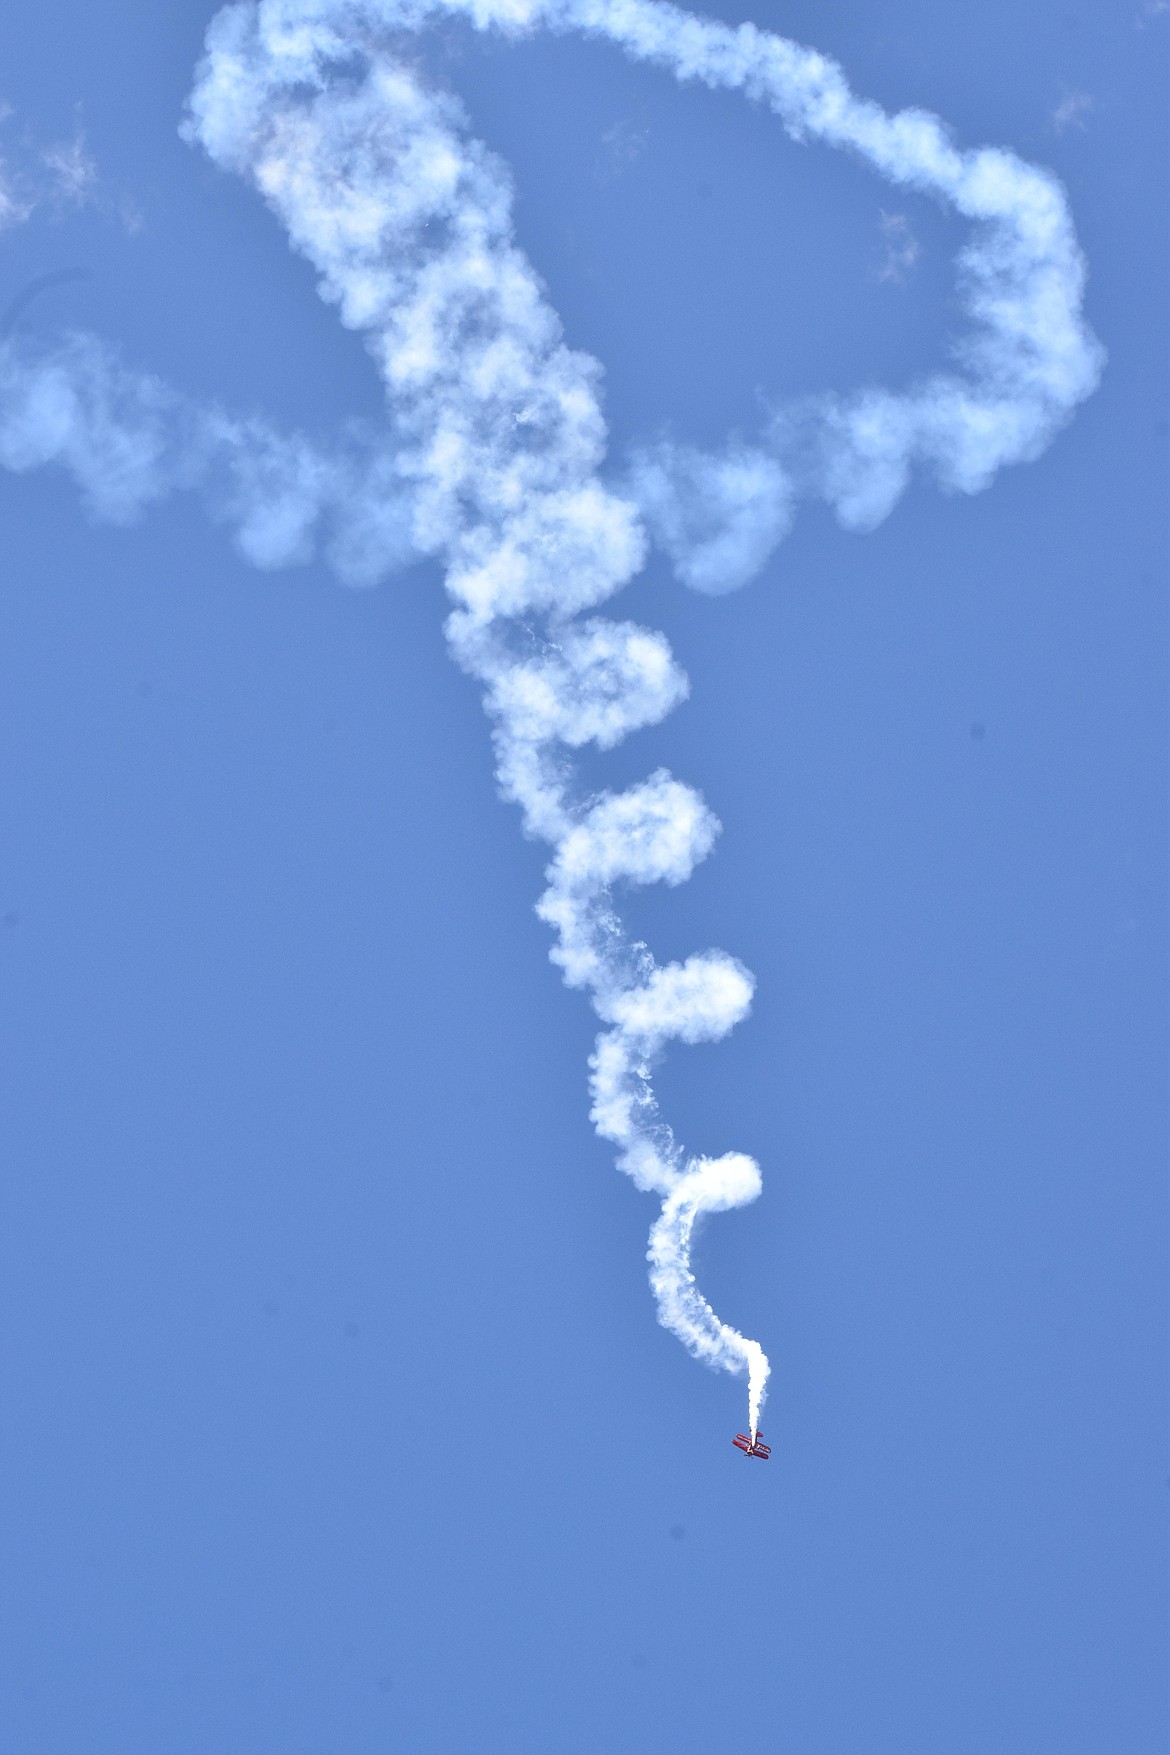 A biplane trailing smoke – don’t worry, it was intentional – makes a spiral pattern during an acrobatics exercise designed to delight spectators at the Moses Lake Airshow.